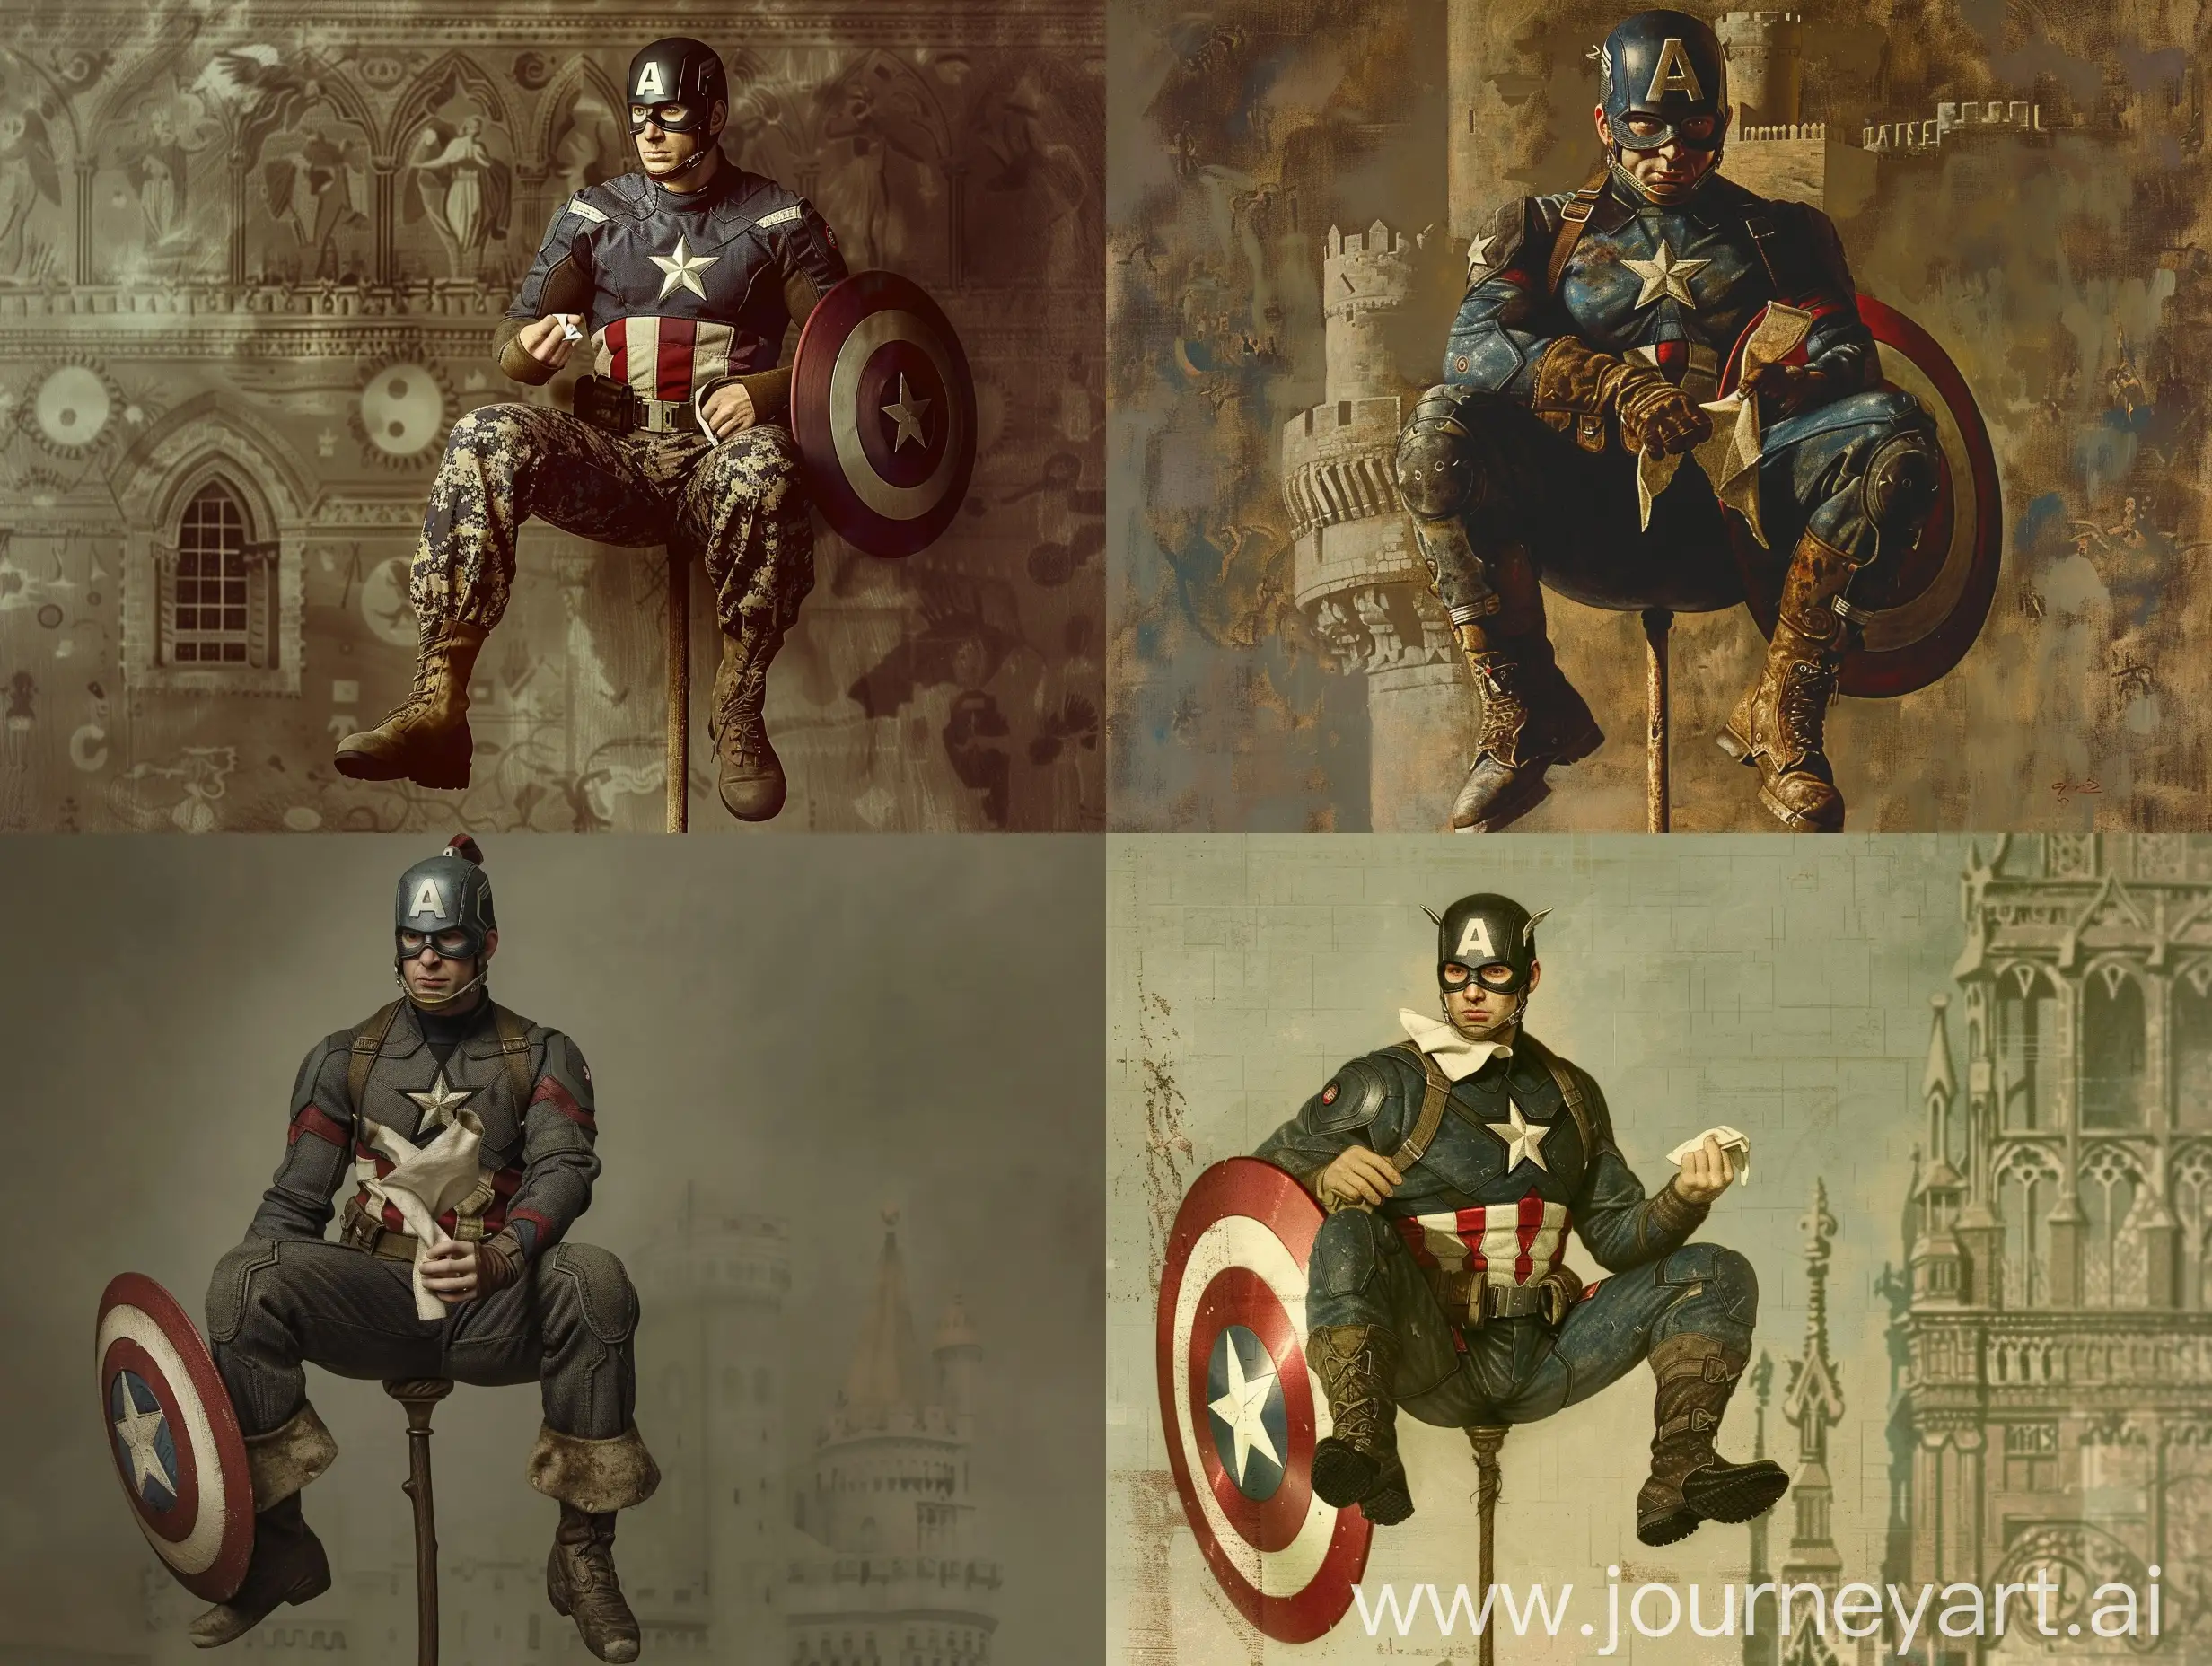 captain america is a marvel character, american is wearing 80s military uniform, captain american is wearing cameltoe military uniform, captain american is like a crusader, captain american has a 15th century castle type shield, shield on captain's left leg It is American, the American captain has a handkerchief in the fingers of his right hand, the American captain is sitting on a stick. Alone, Captain America is in Camelot Palace in the 15th century, the lighting is classical style, the Witcher is Persian Prince style, Captain America's face is neither happy nor sad, excellent quality, very clear. , very real, q2.